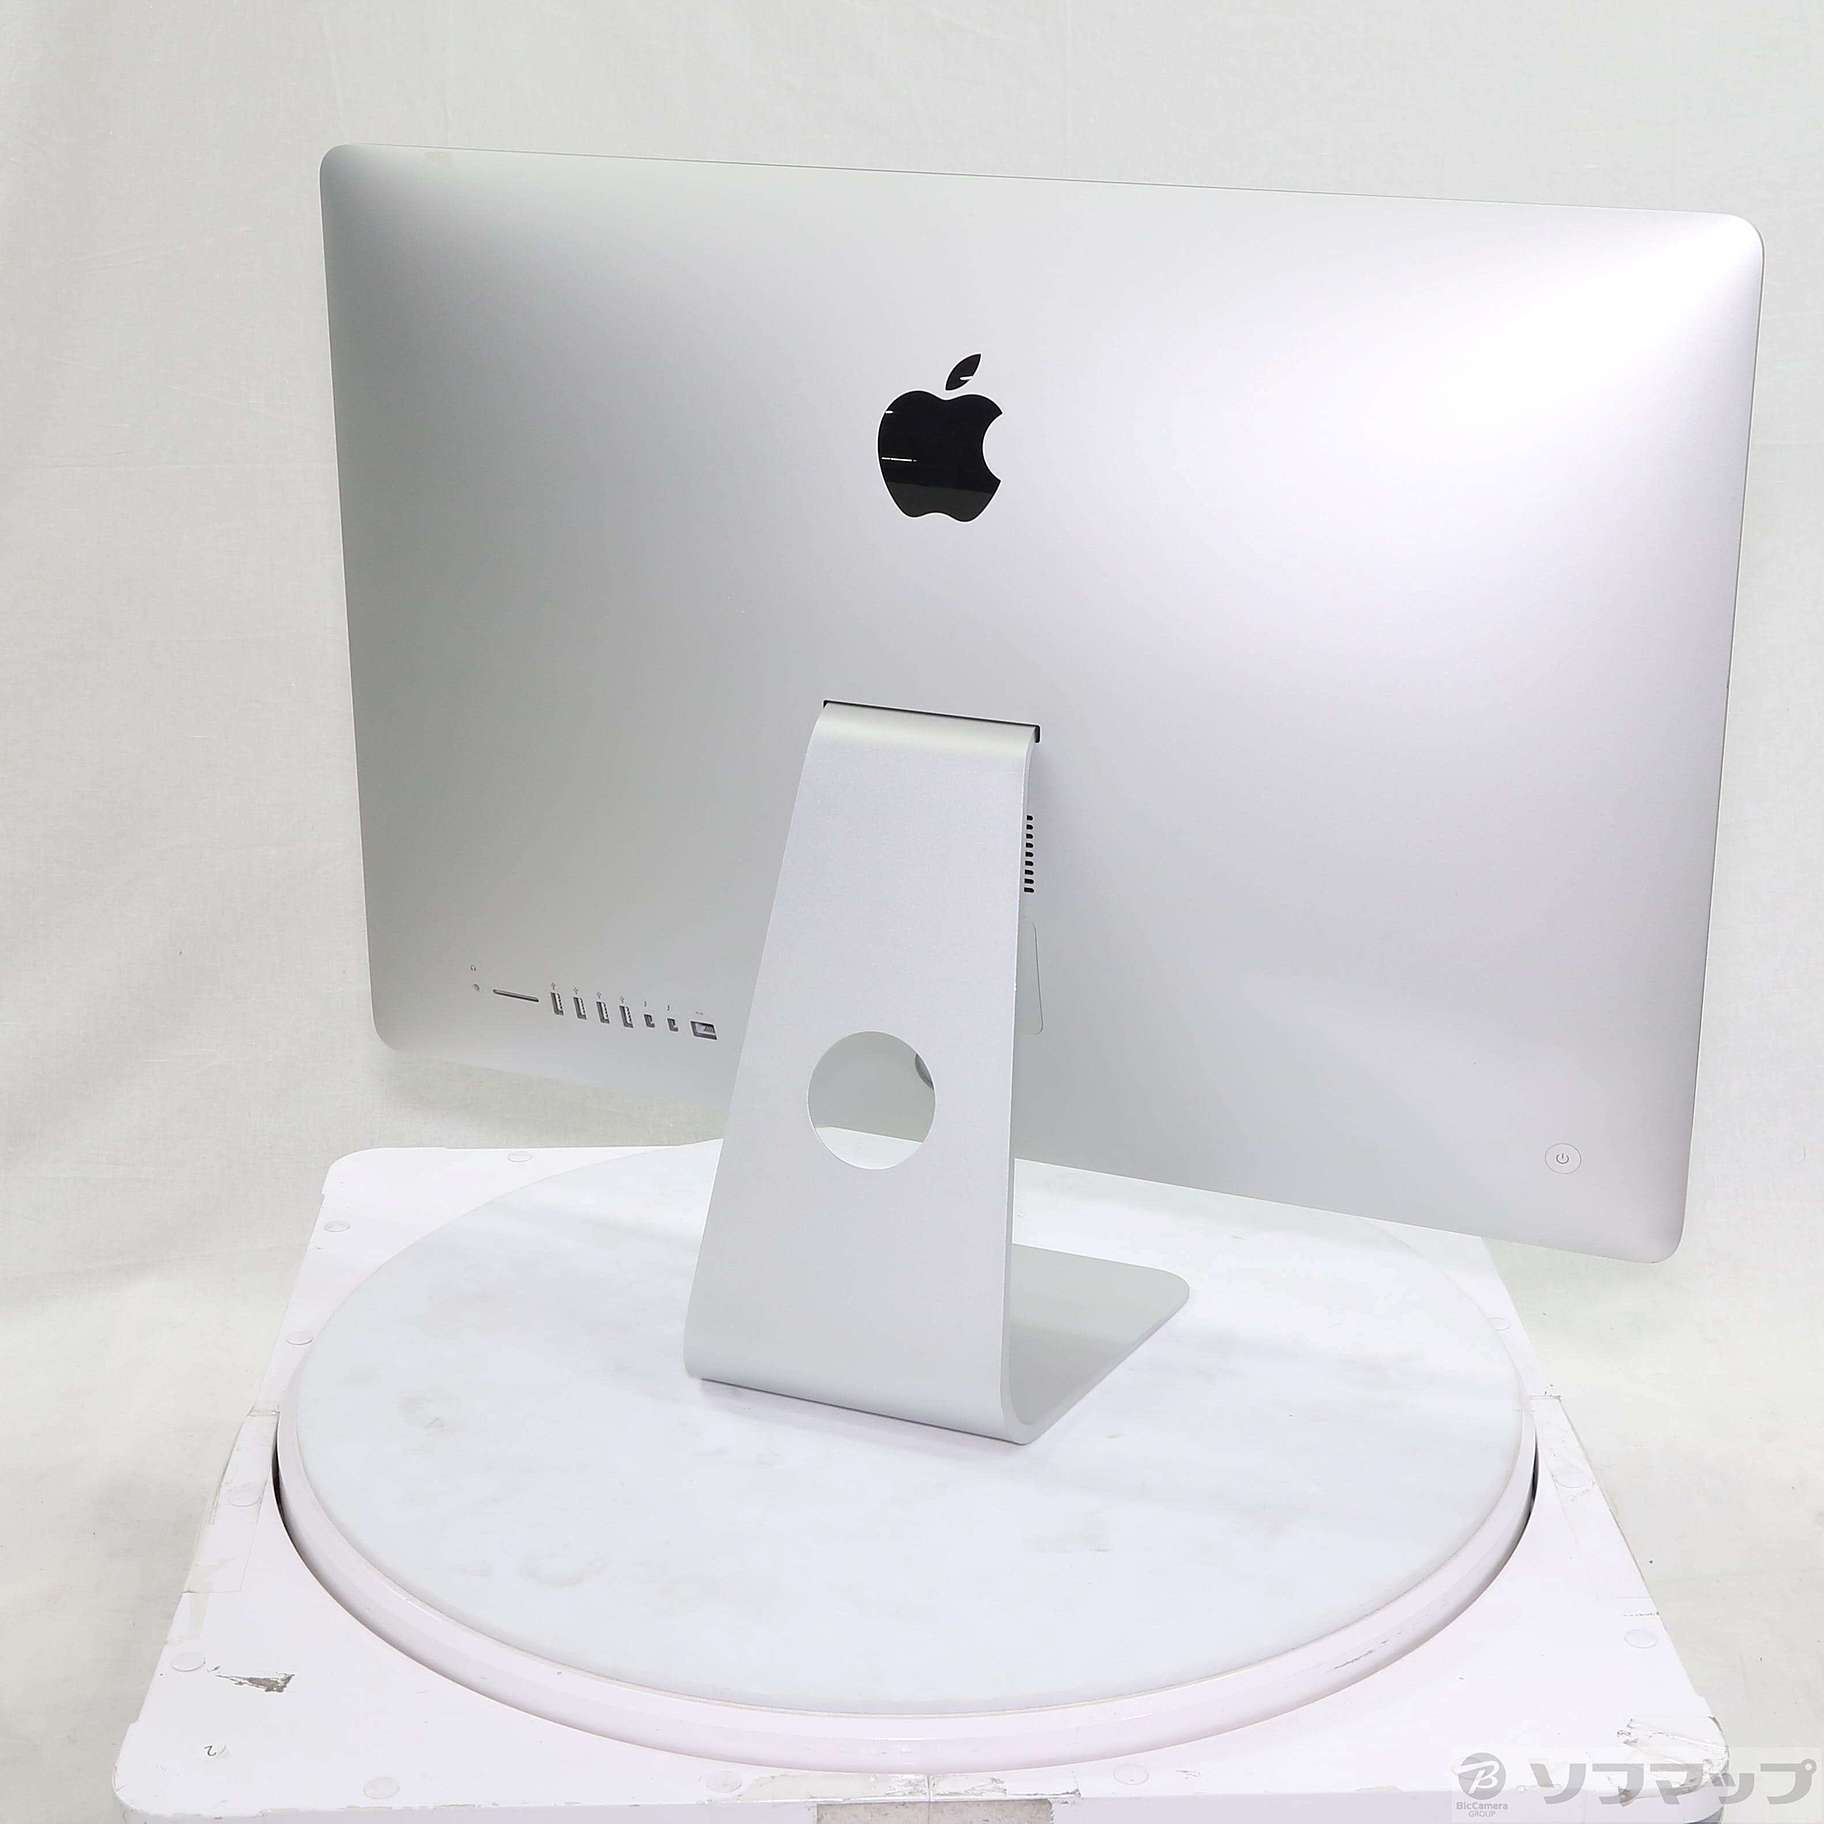 iMac 27-inch Late 2013 ME088J／A Core_i5 3.2GHz 16GB HDD3TB 〔10.15 Catalina〕